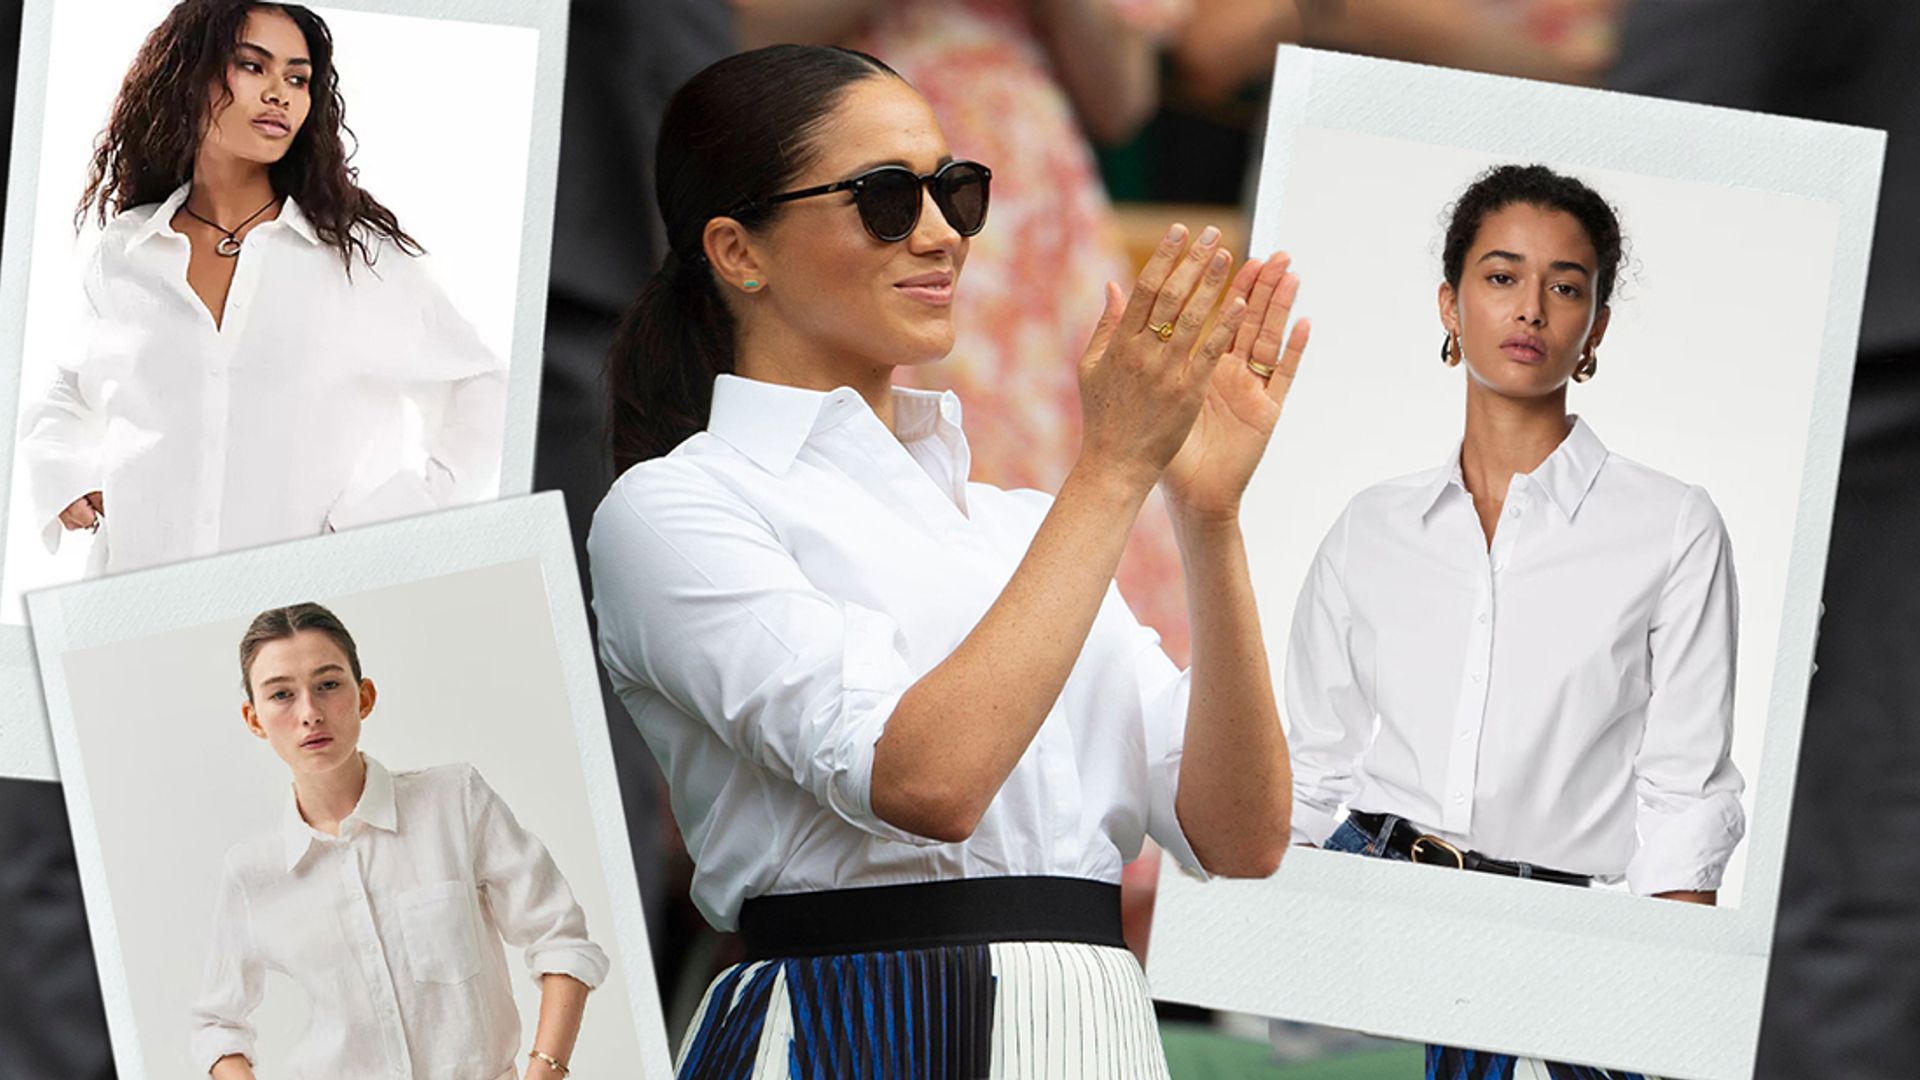 7 best women's white shirts if you're inspired by Meghan Markle's recent look